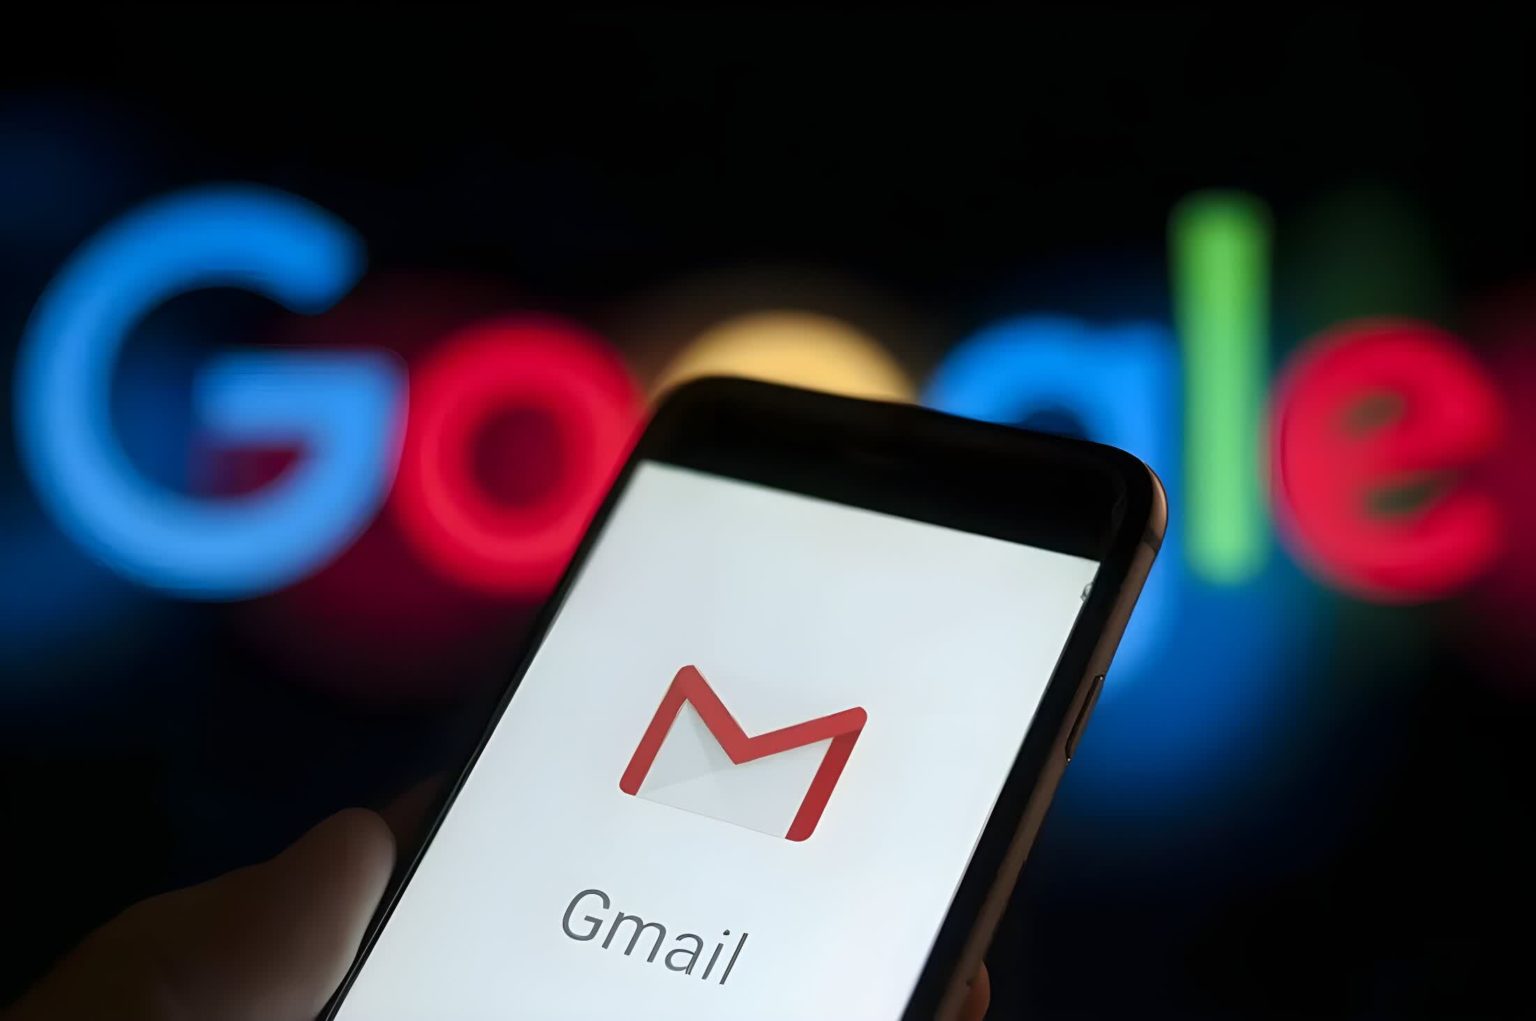 Google confirms it is definitely not killing off Gmail after hoax goes viral